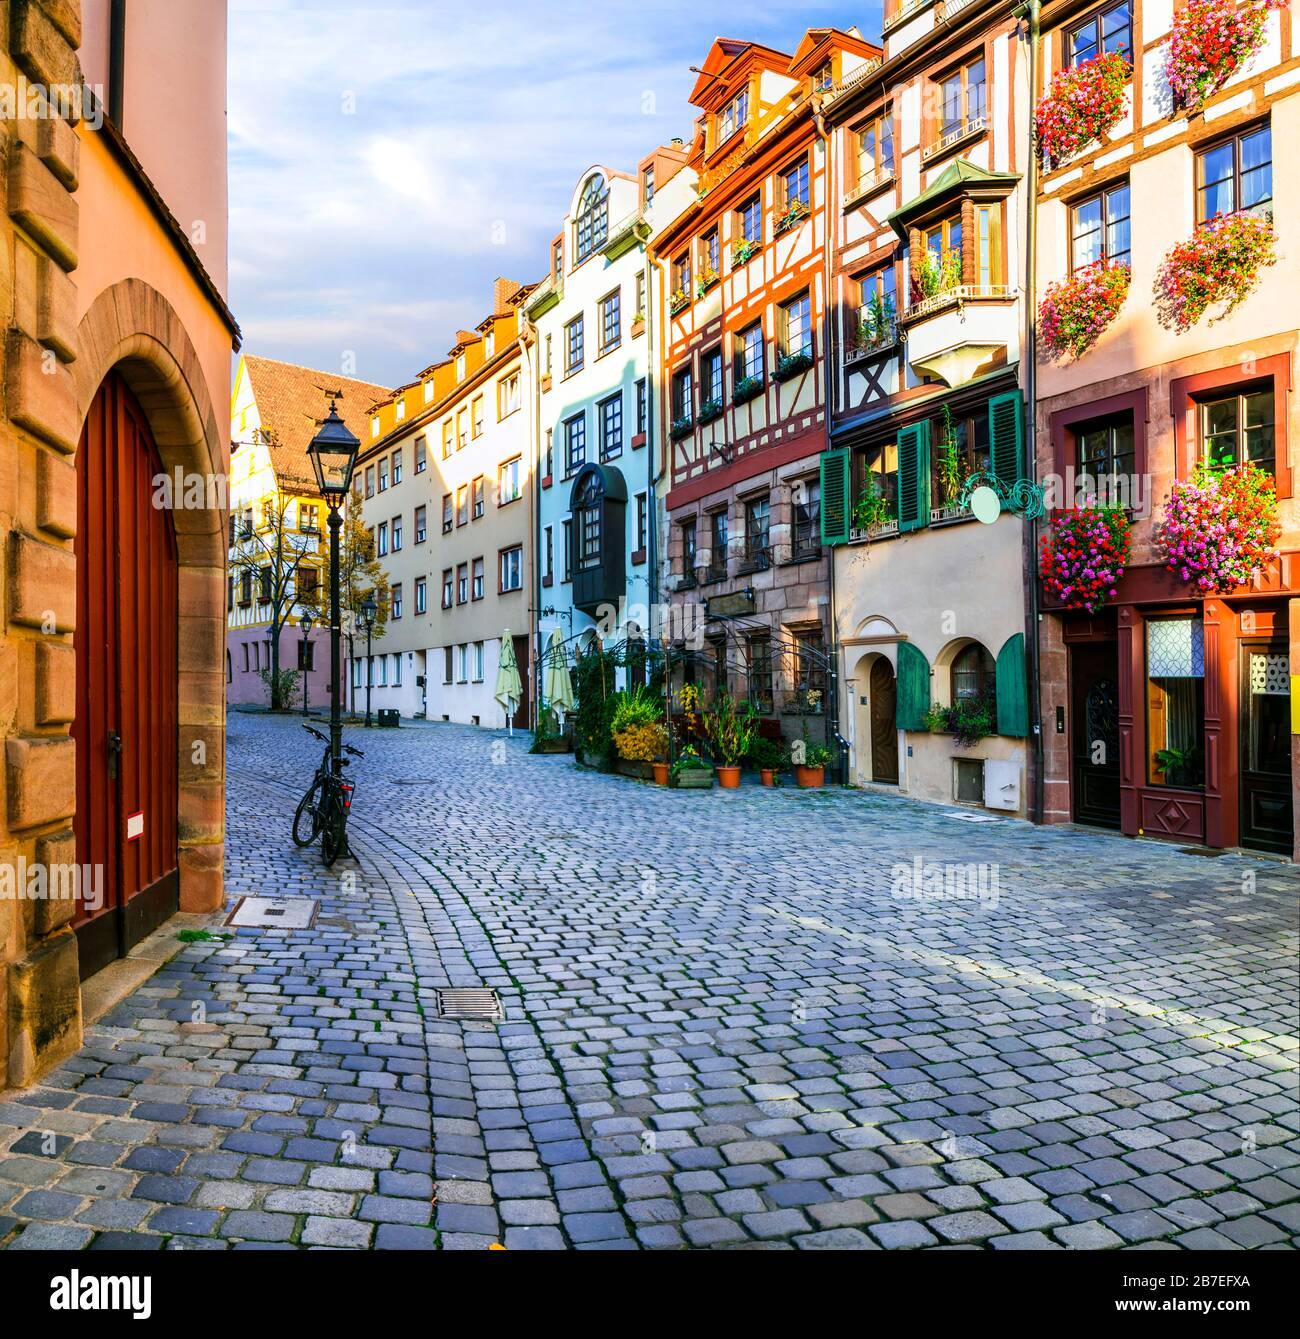 Traditional colorful houses in Nuremberg old town,Germany. Stock Photo